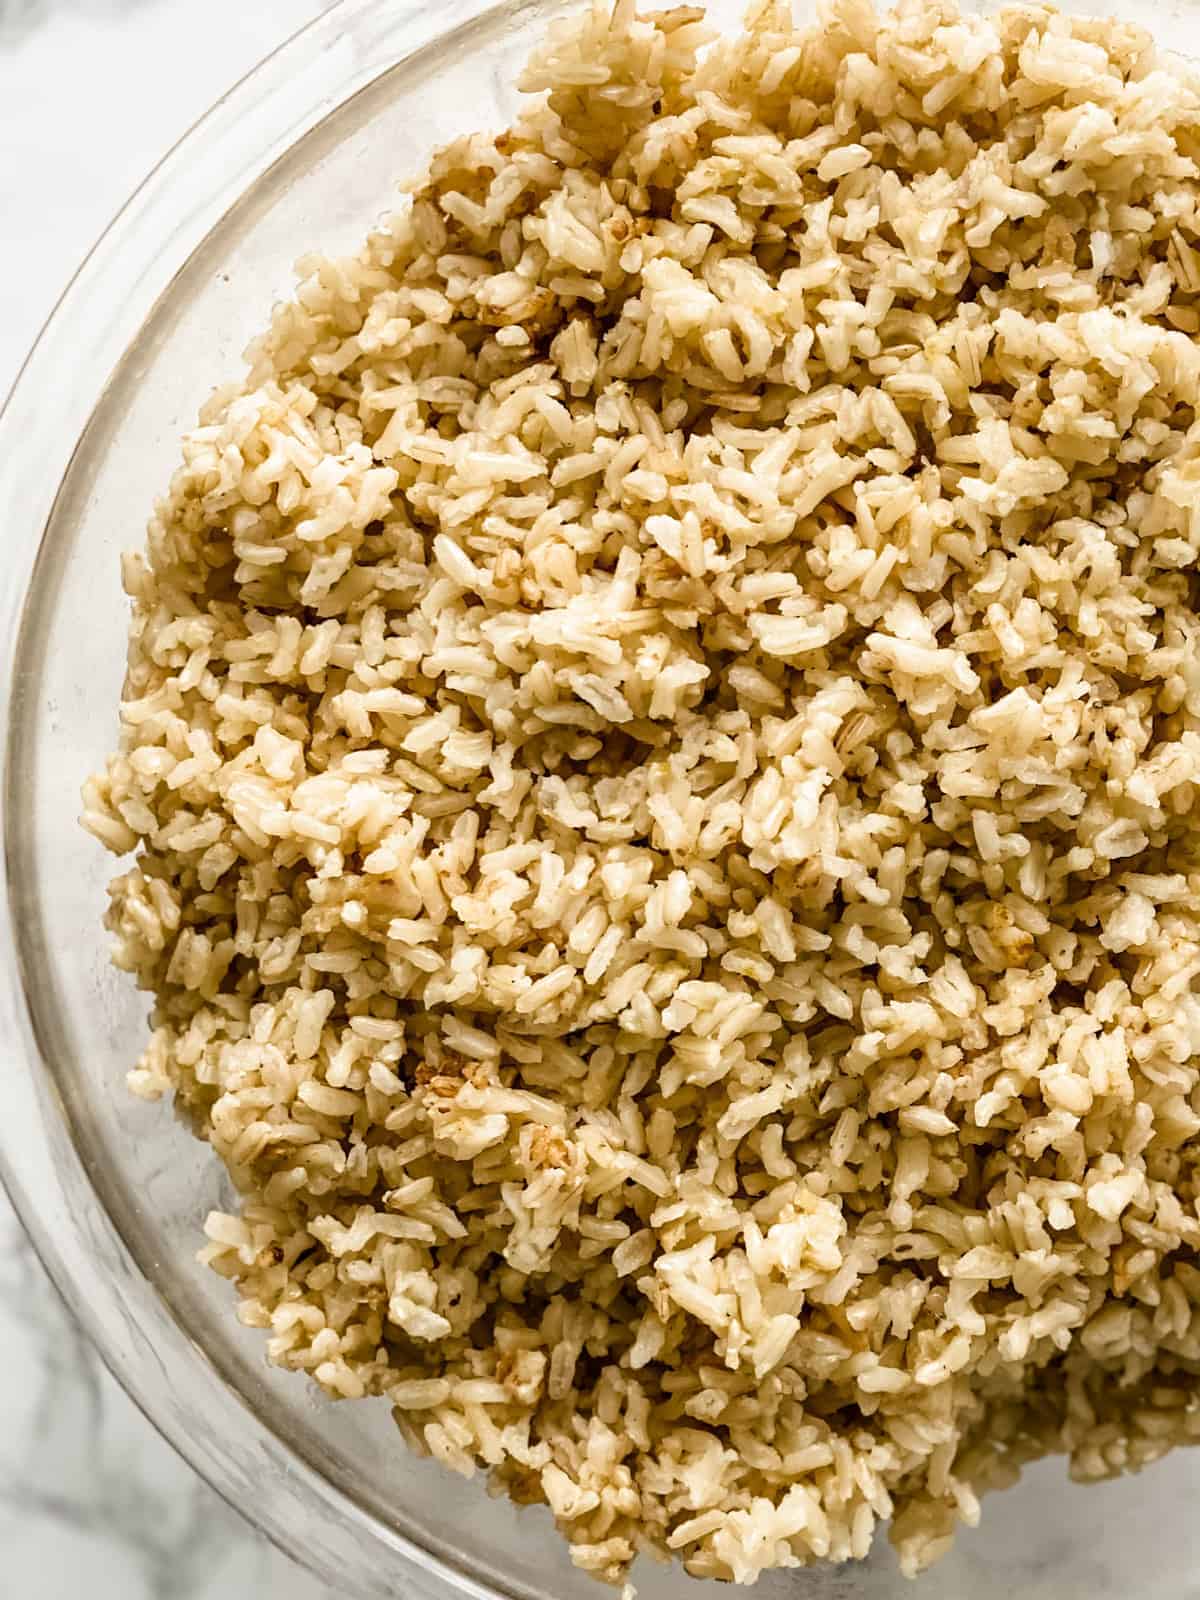 How to Cook Brown Rice in Instant Pot (Step-by-Step Guide)